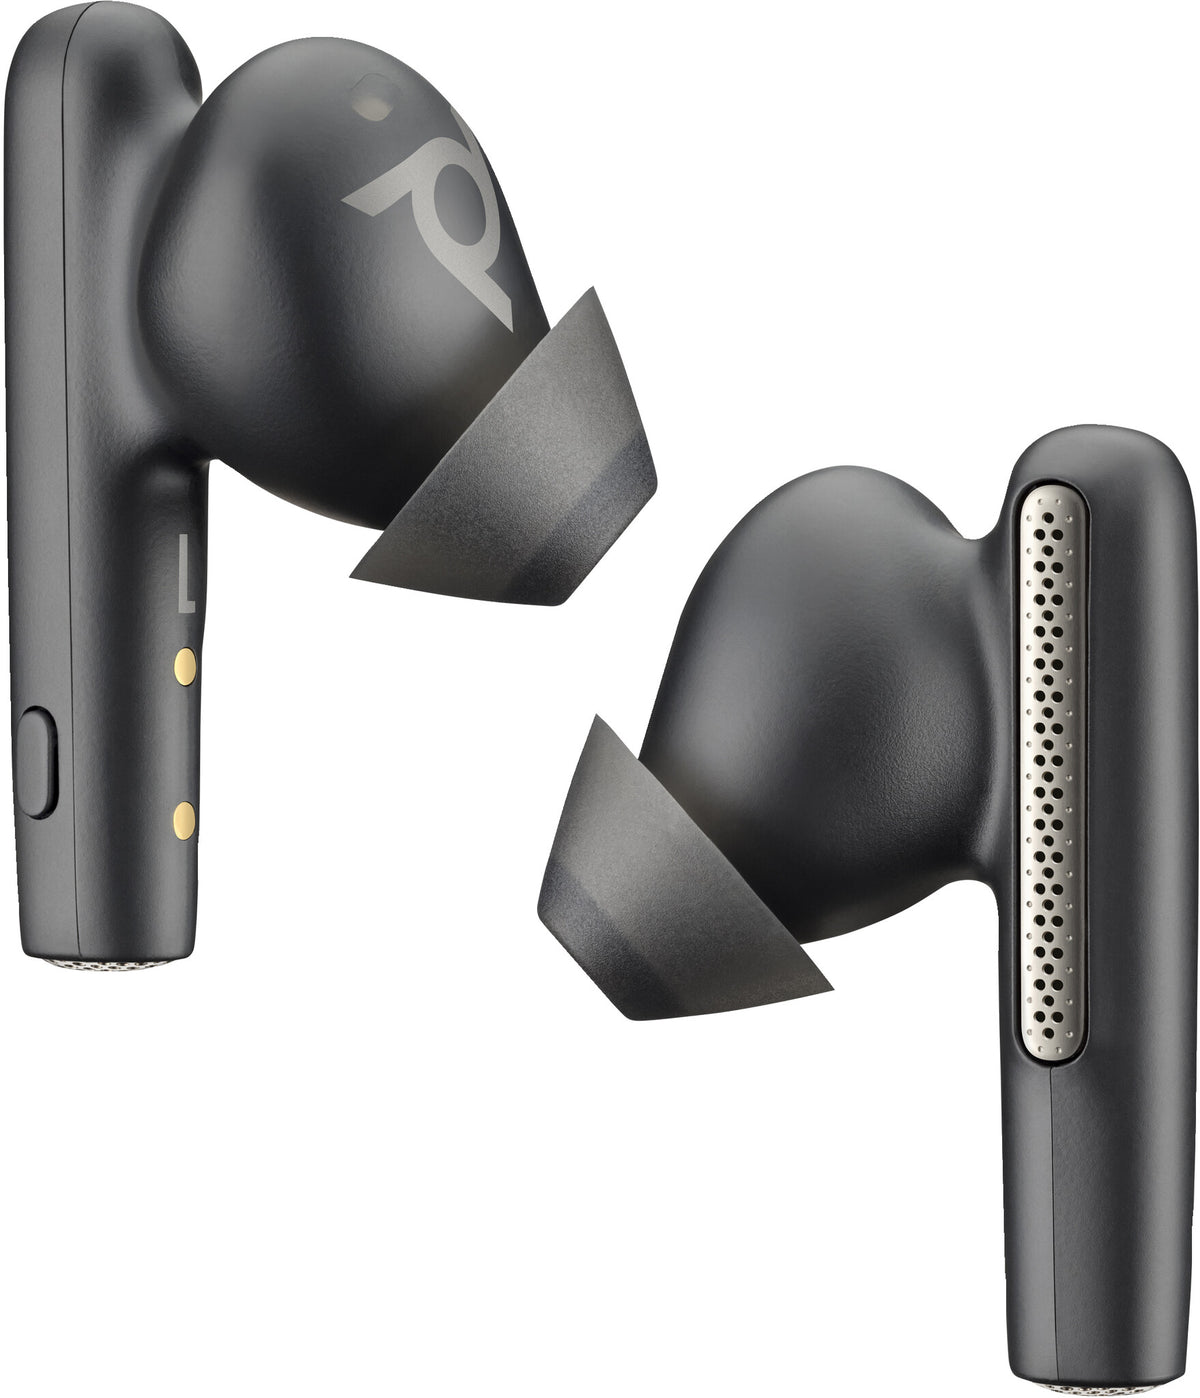 POLY Voyager Free 60+ UC - True Wireless Stereo (TWS) Earbuds in Carbon Black + BT700 USB-C Adapter + Touchscreen Charge Case